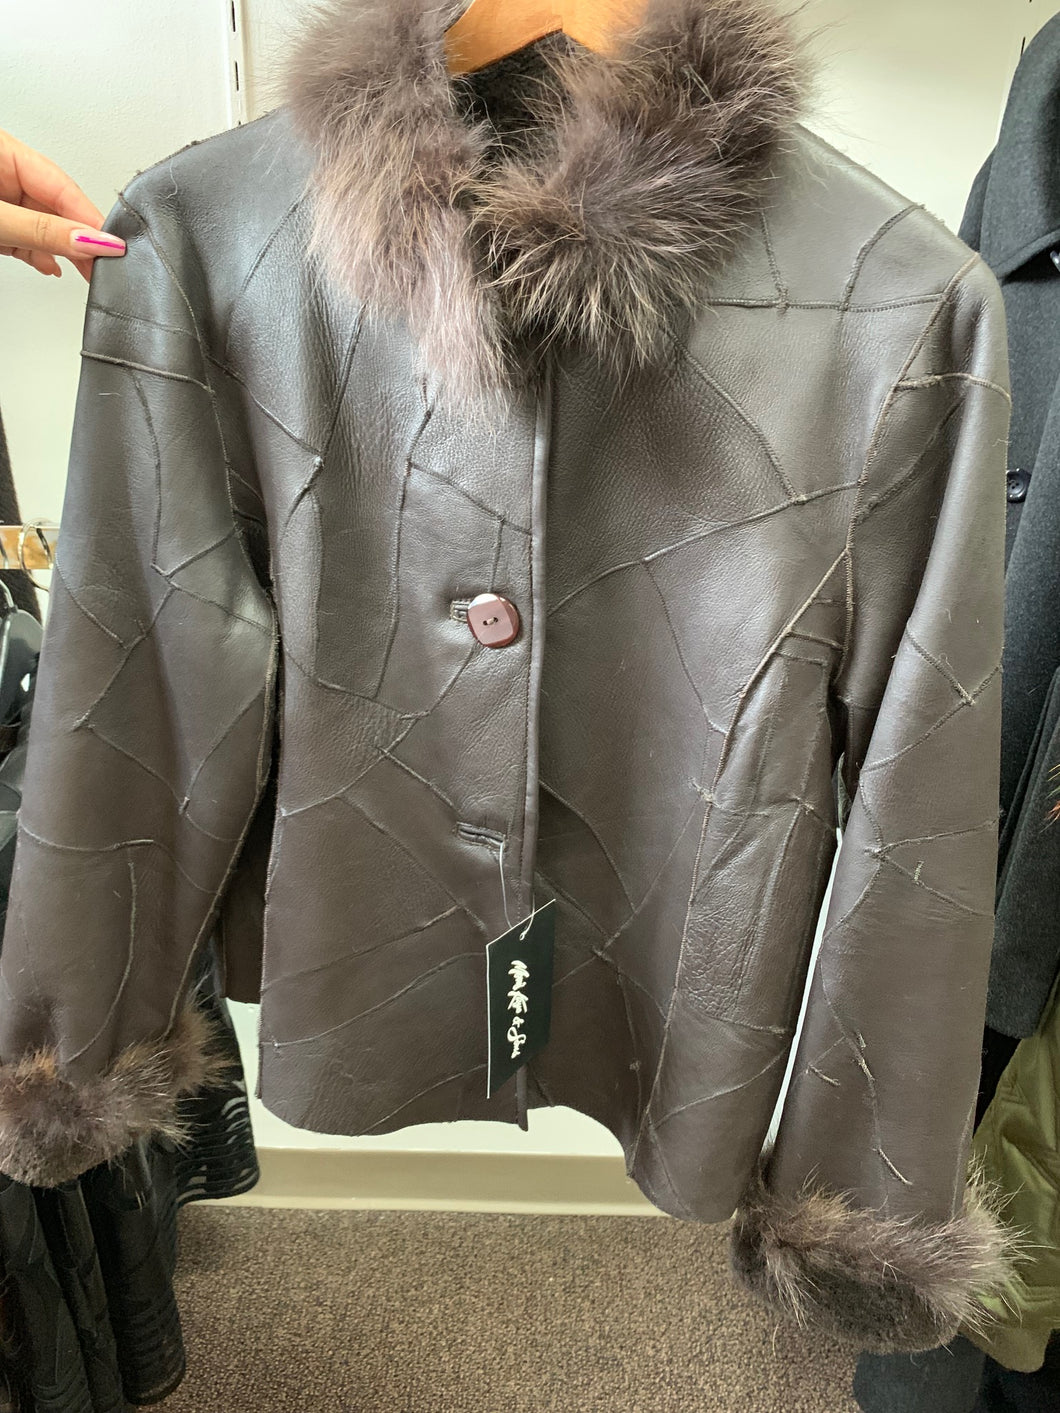 Mosaic Brown Leather Jacket with Fur Collar